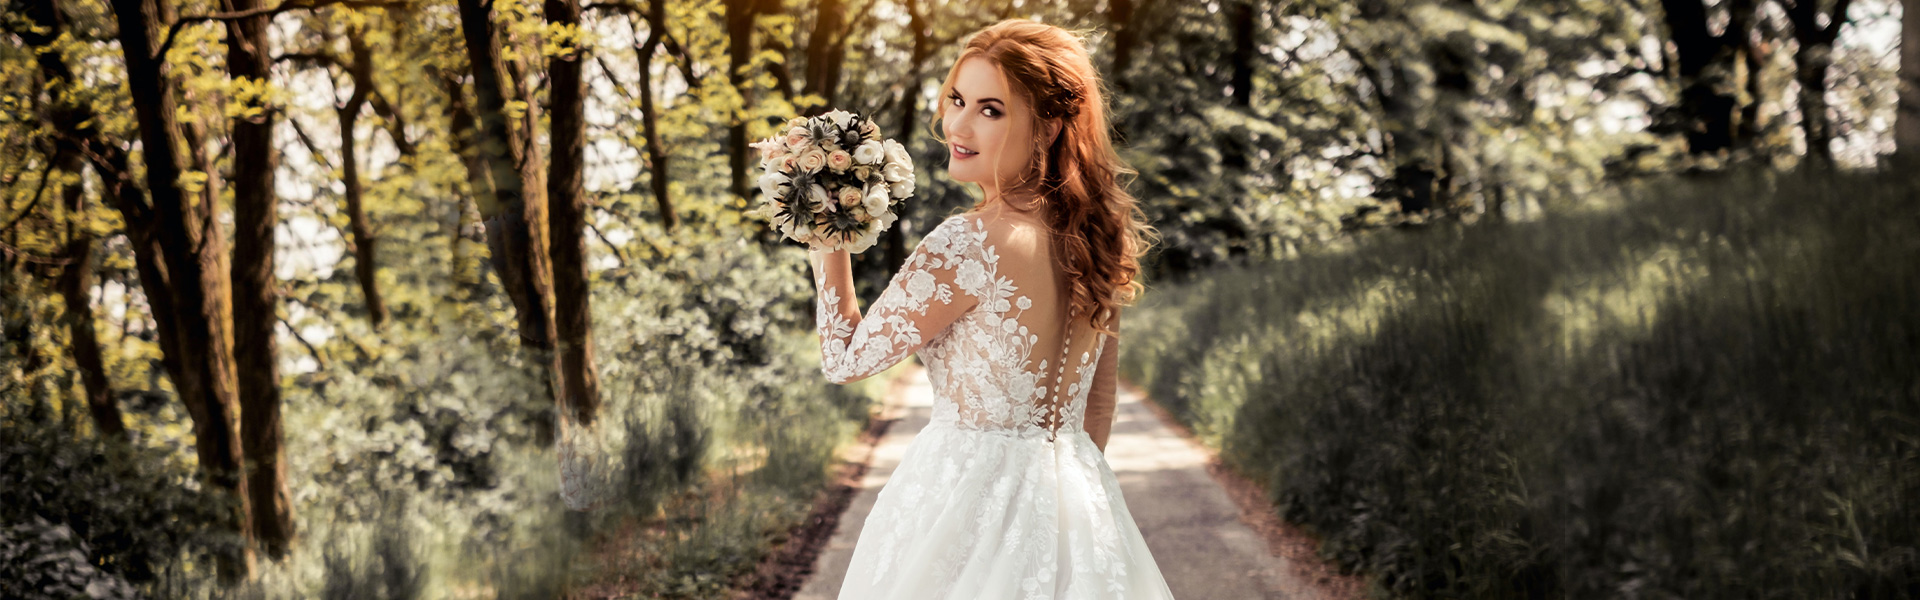 Gorgeous bride walking through forest with classic waistline